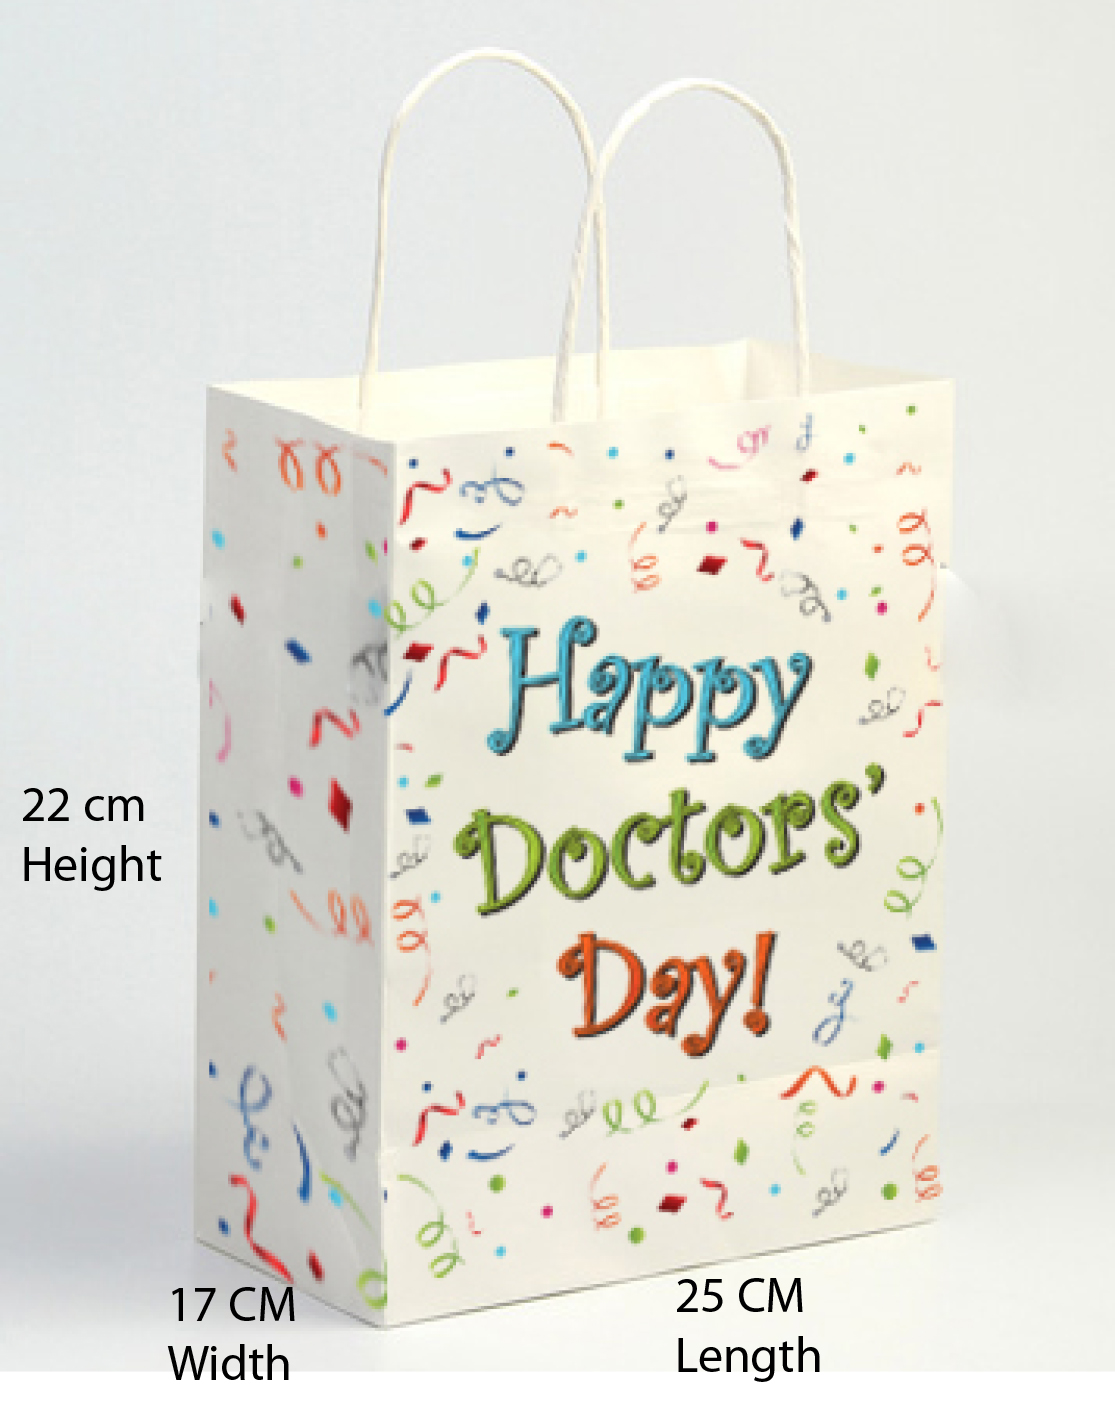 national-doctors-day-announces-2019-greeting-card-honoring-physicians